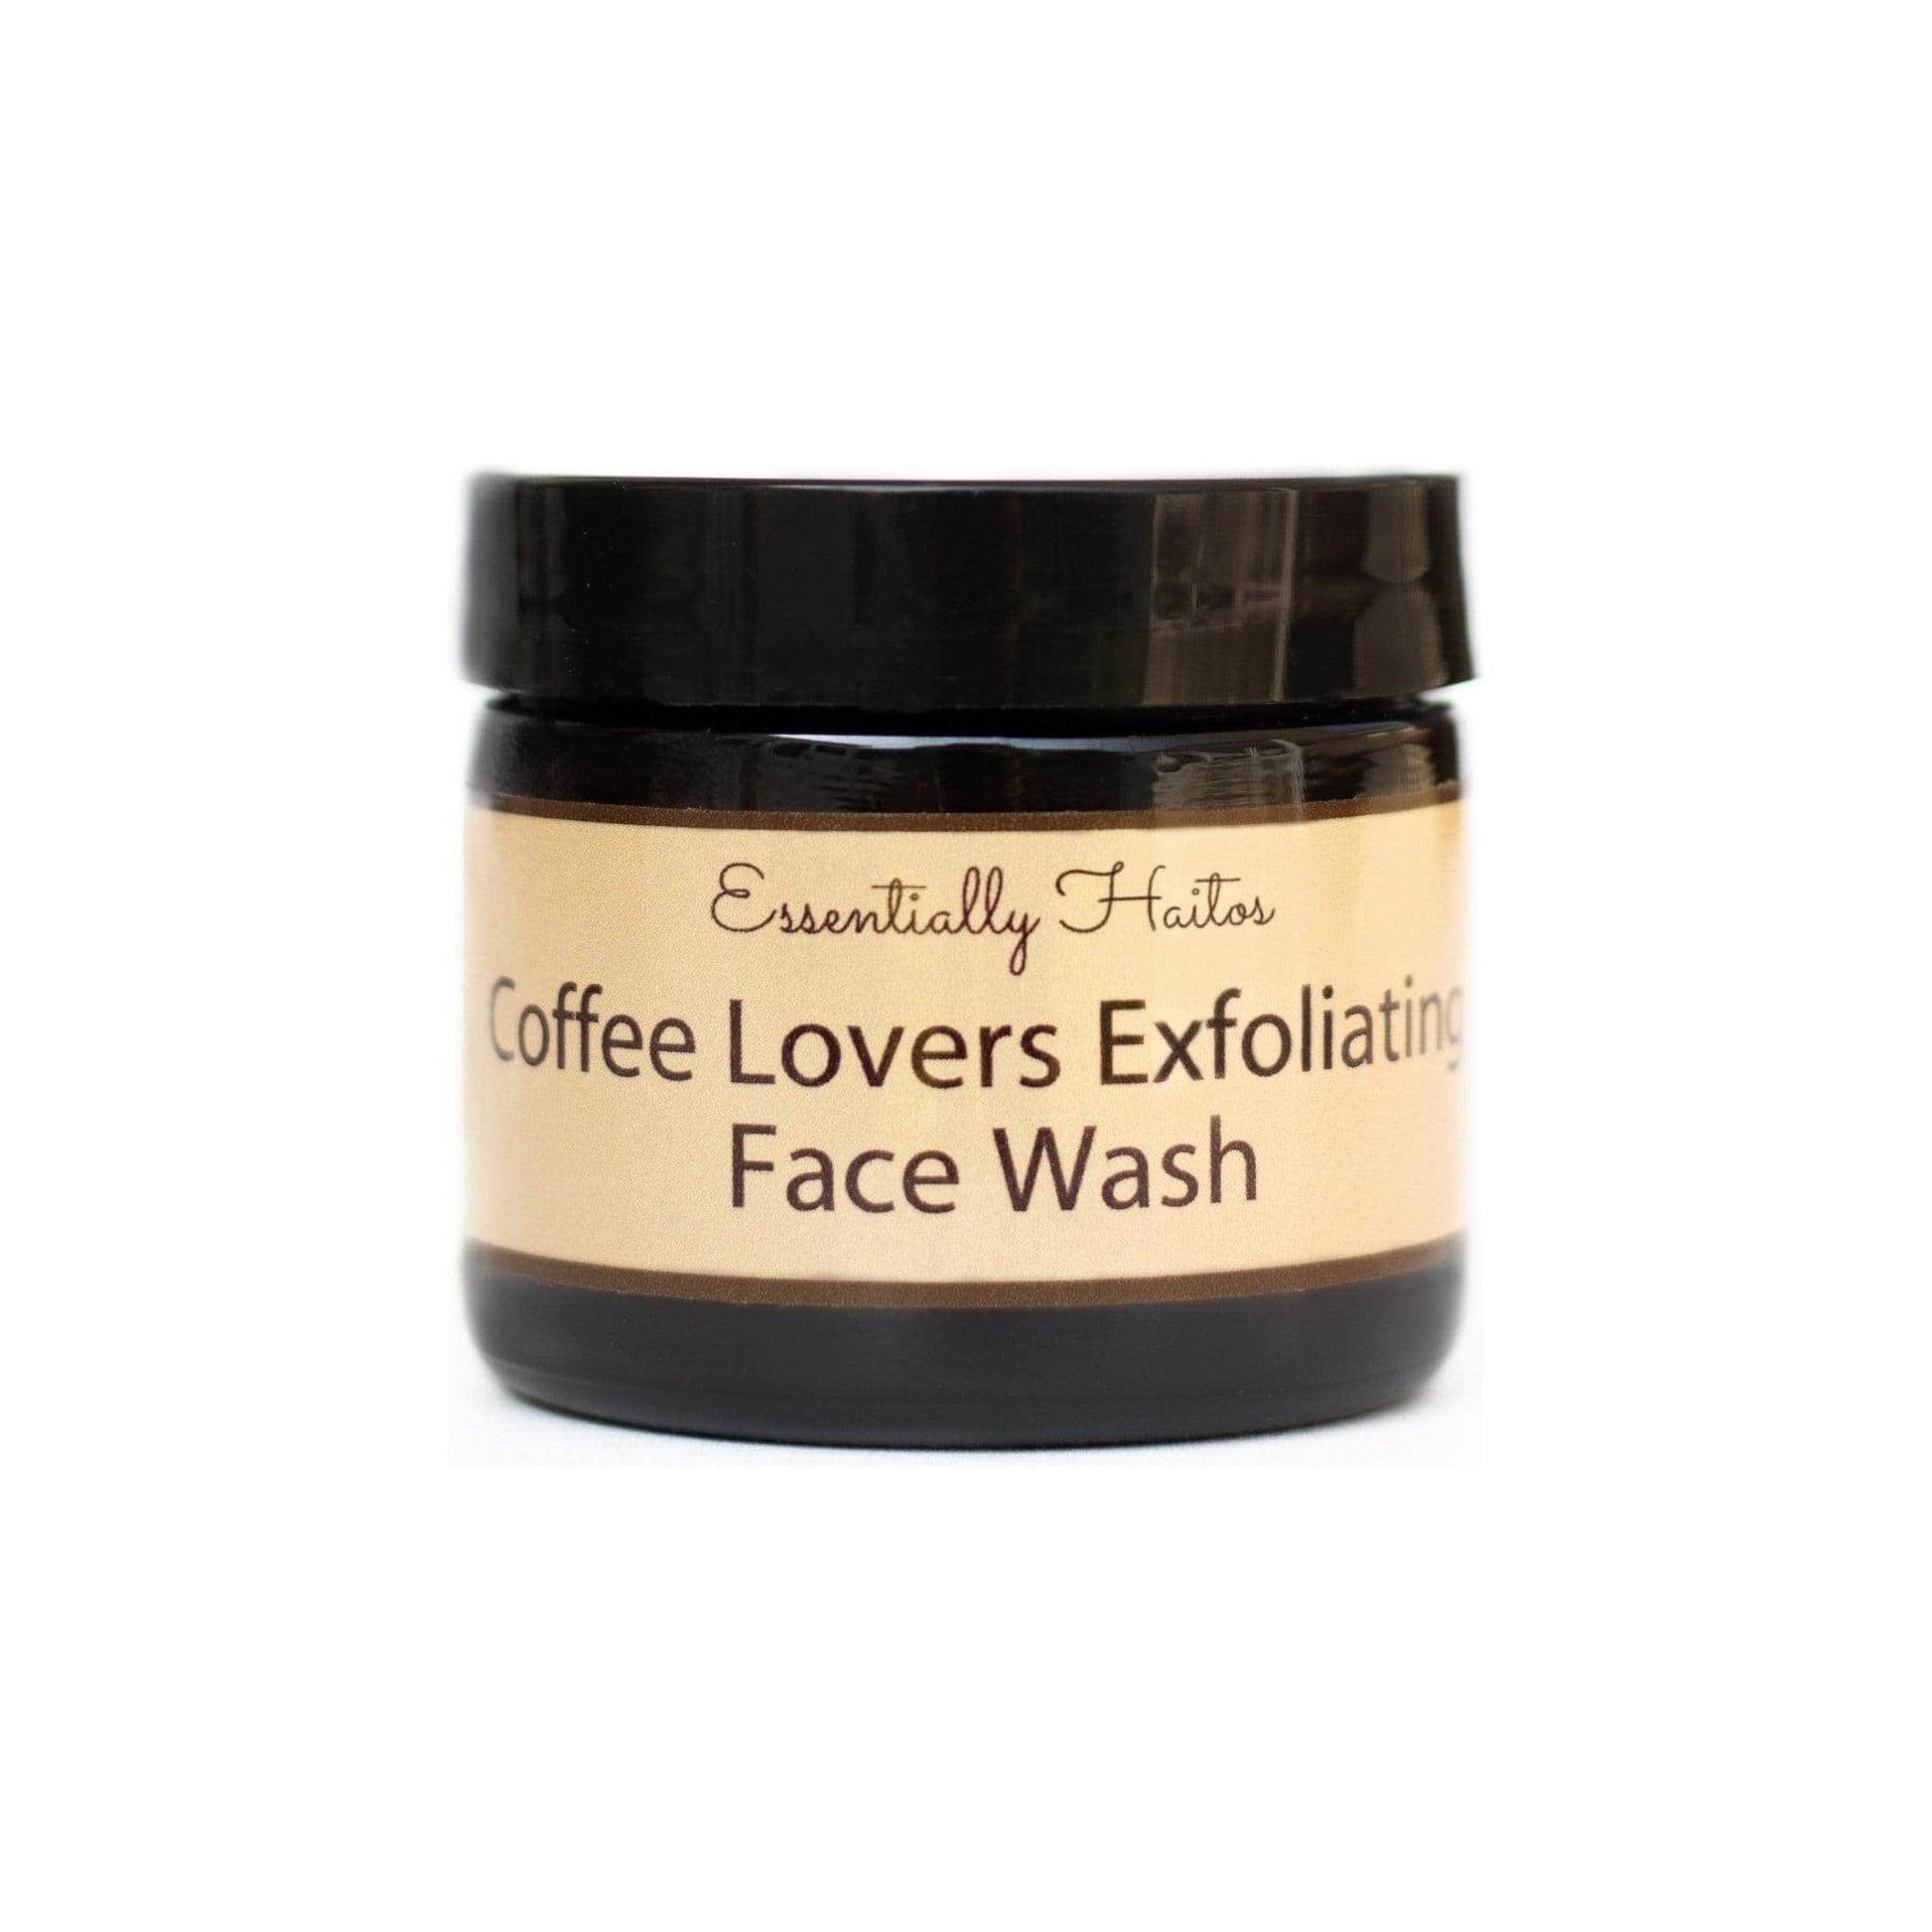 Essentially Haitos Face Coffee Lovers Exfoliating Face Wash